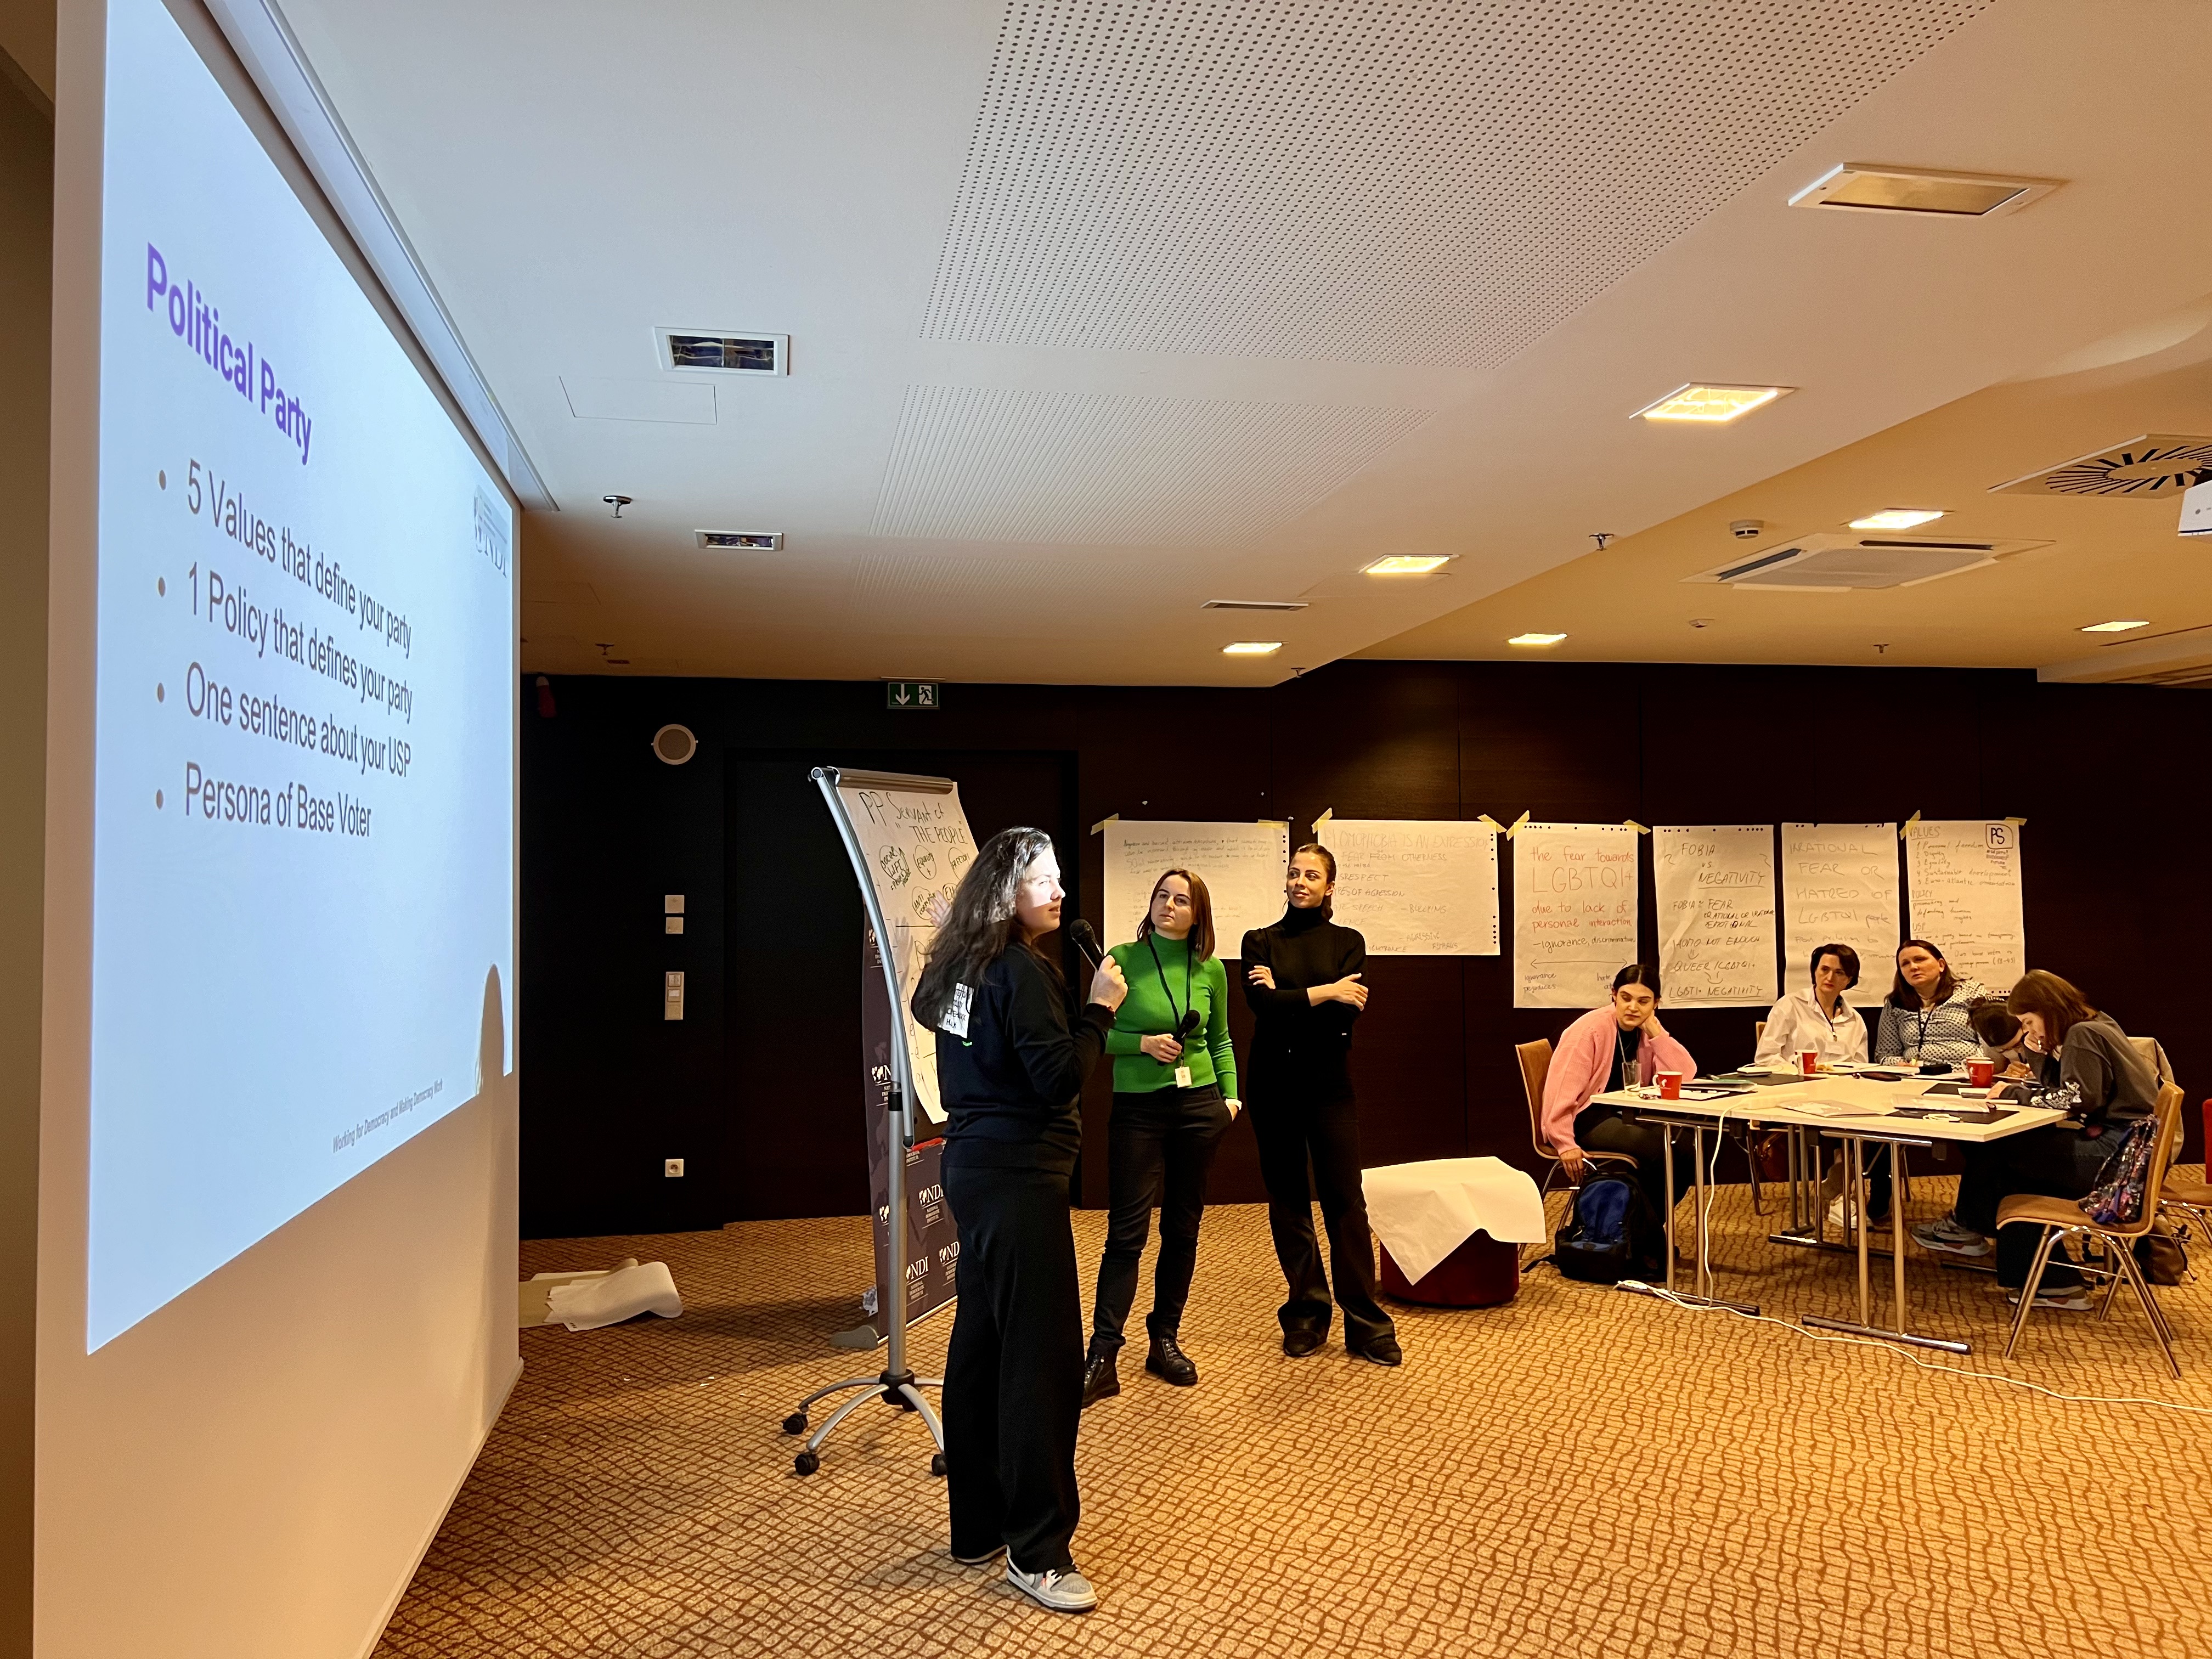 Pictured: Training participants presenting their political parties’ key values around inclusion.